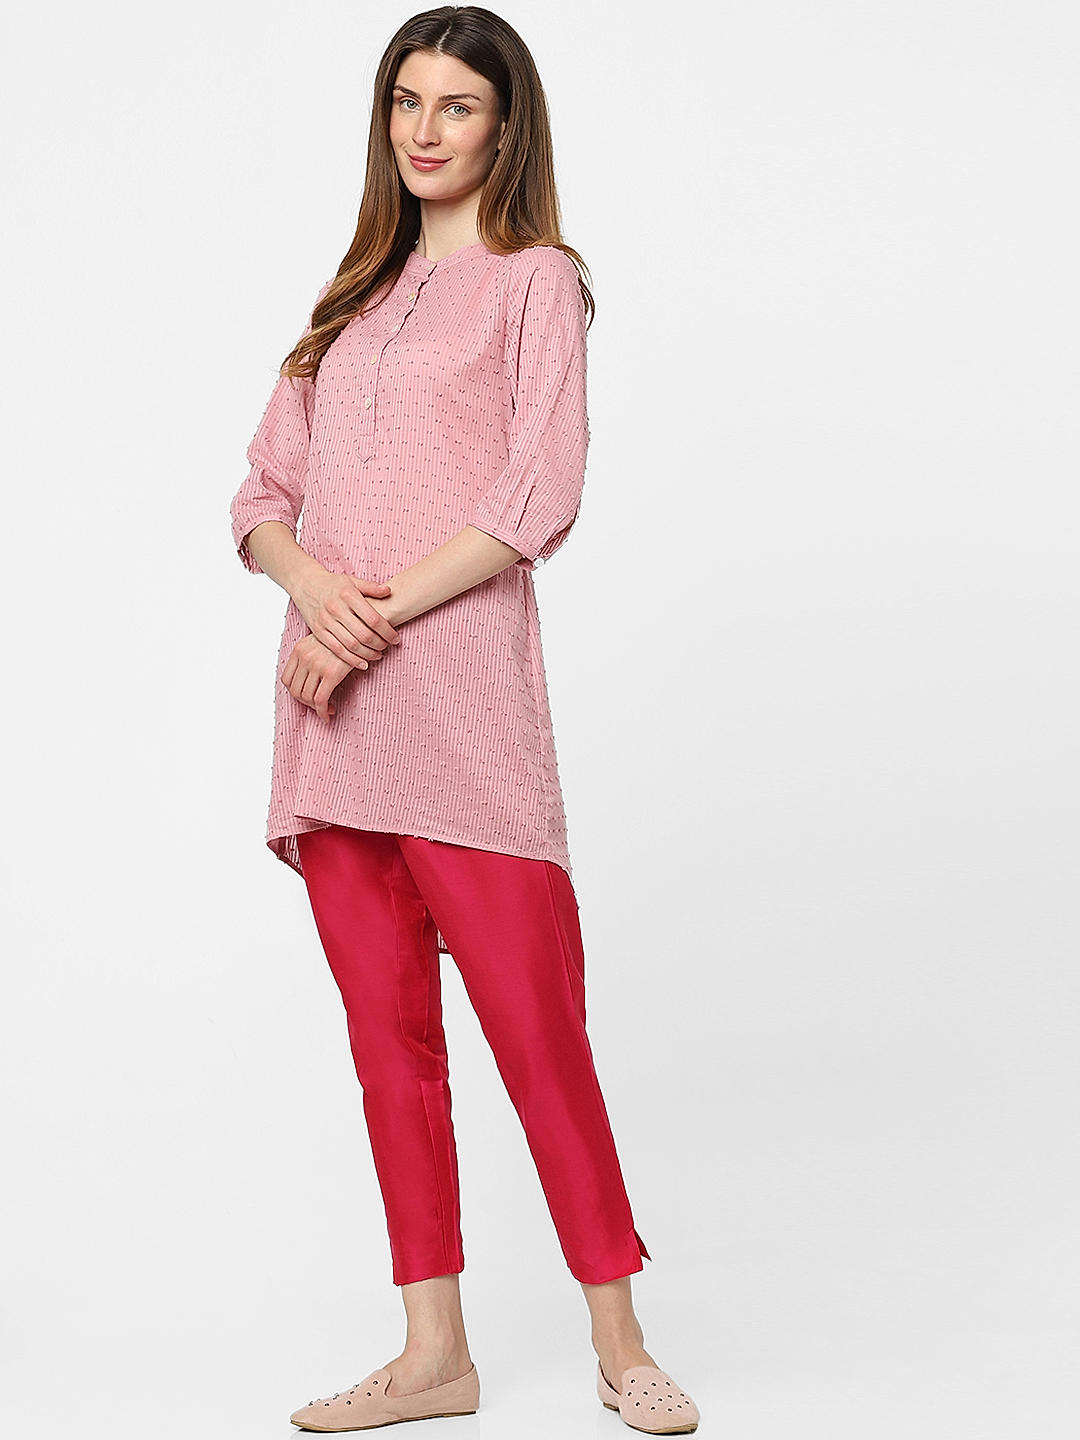 Buy the best Pink cotton dupatta with lace for women in India